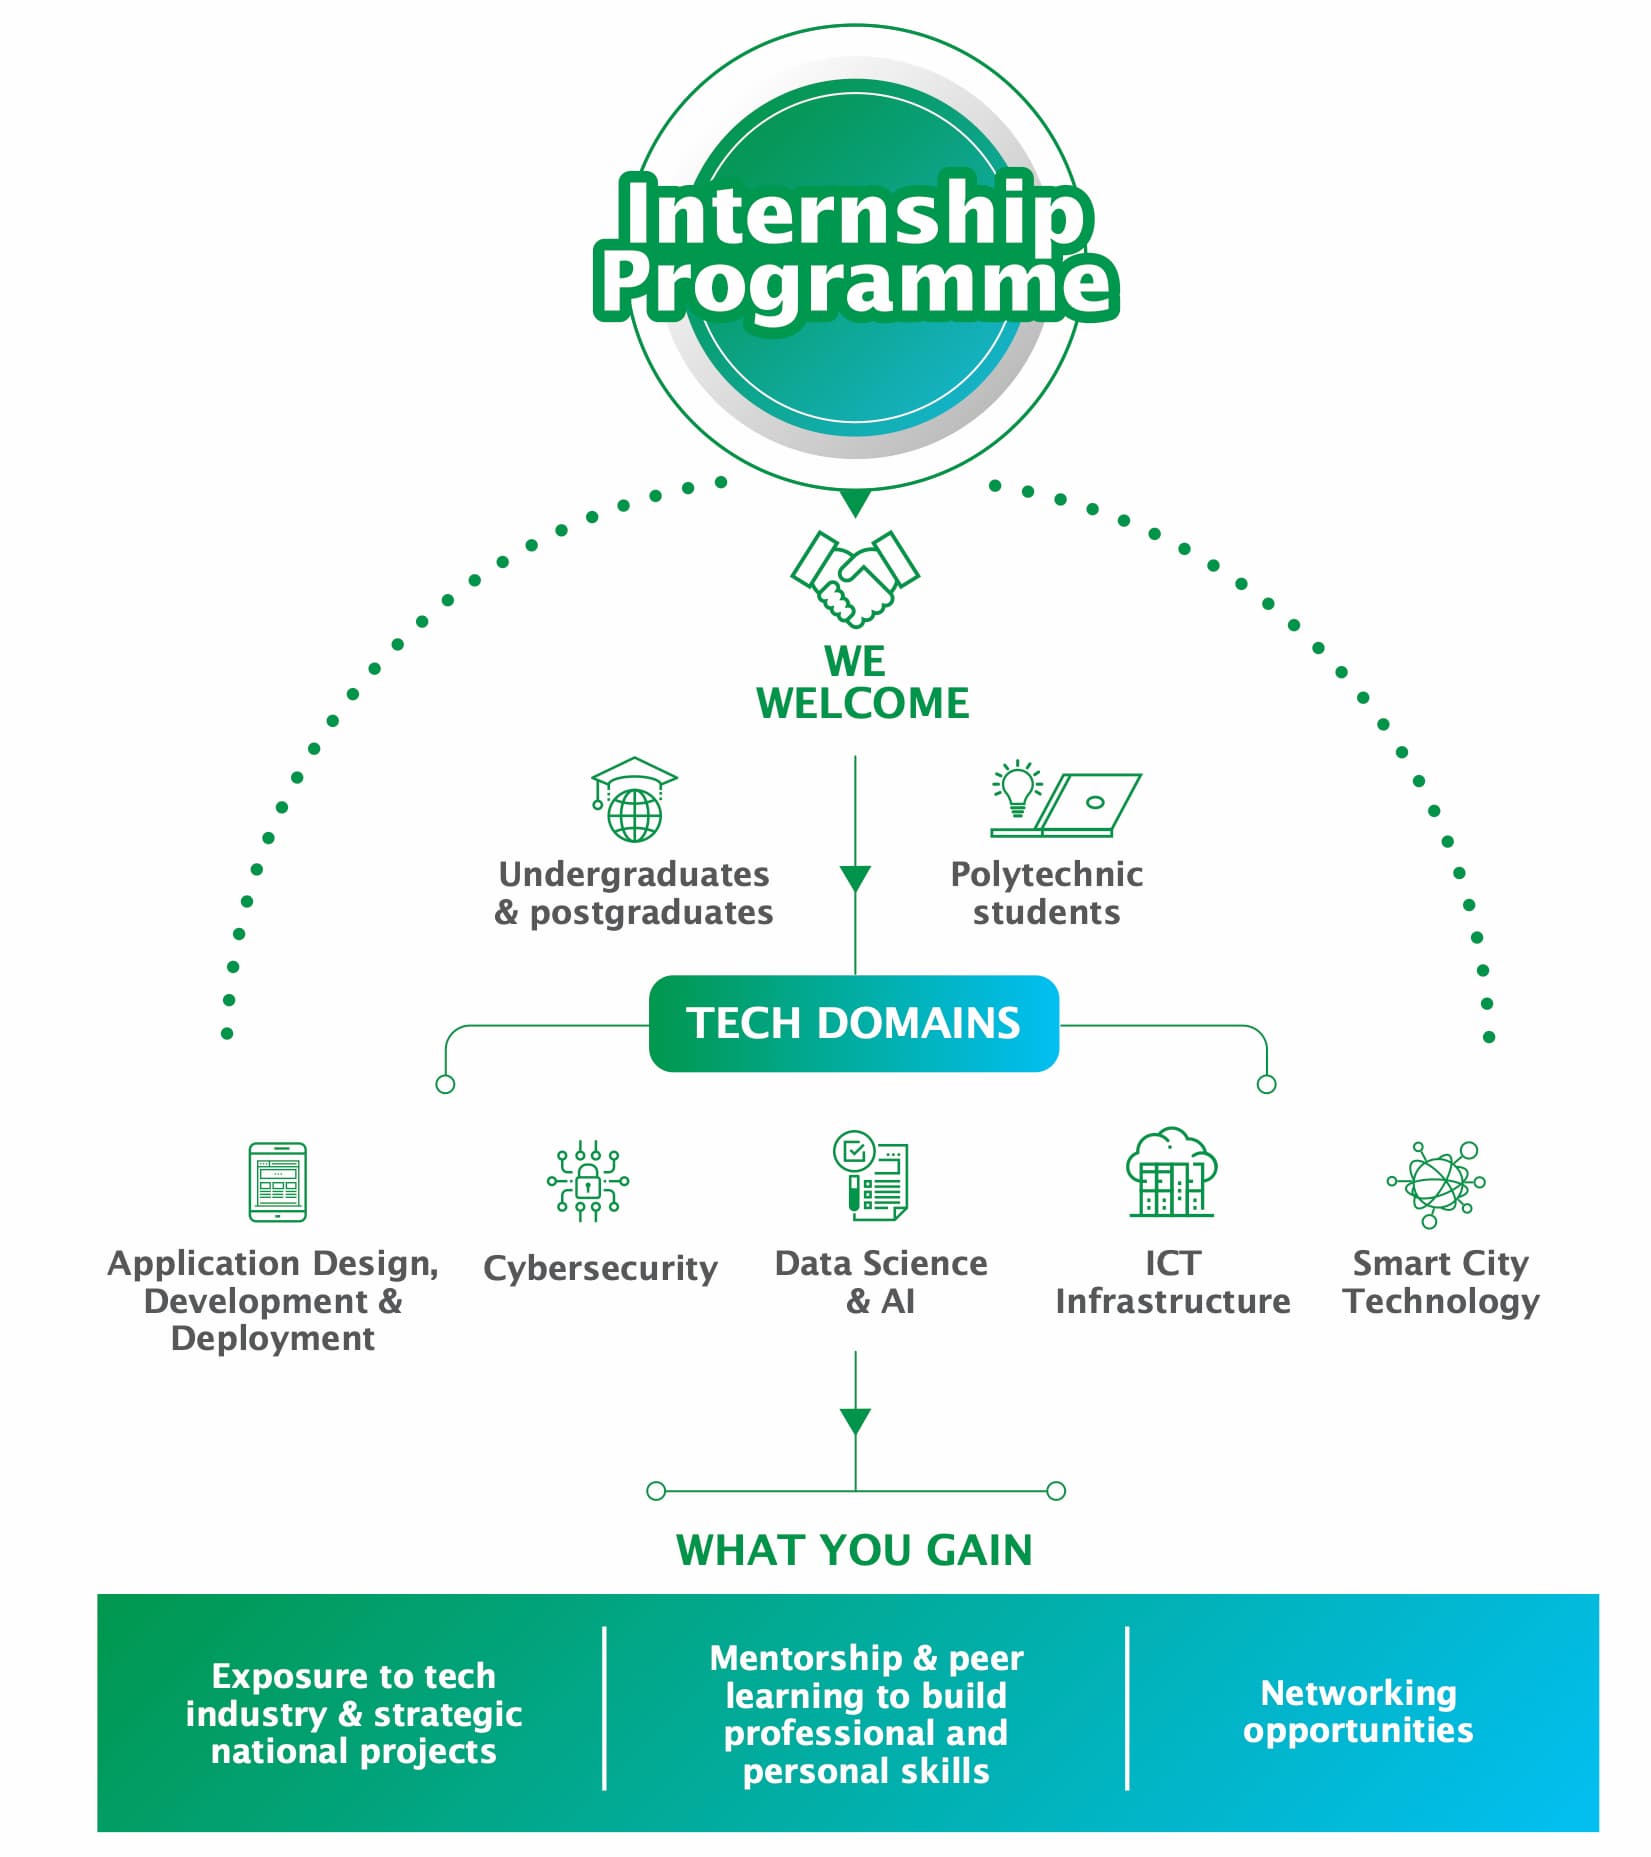 GovTech's internship programme flowchart and what interns stand to gain from GovTech experience